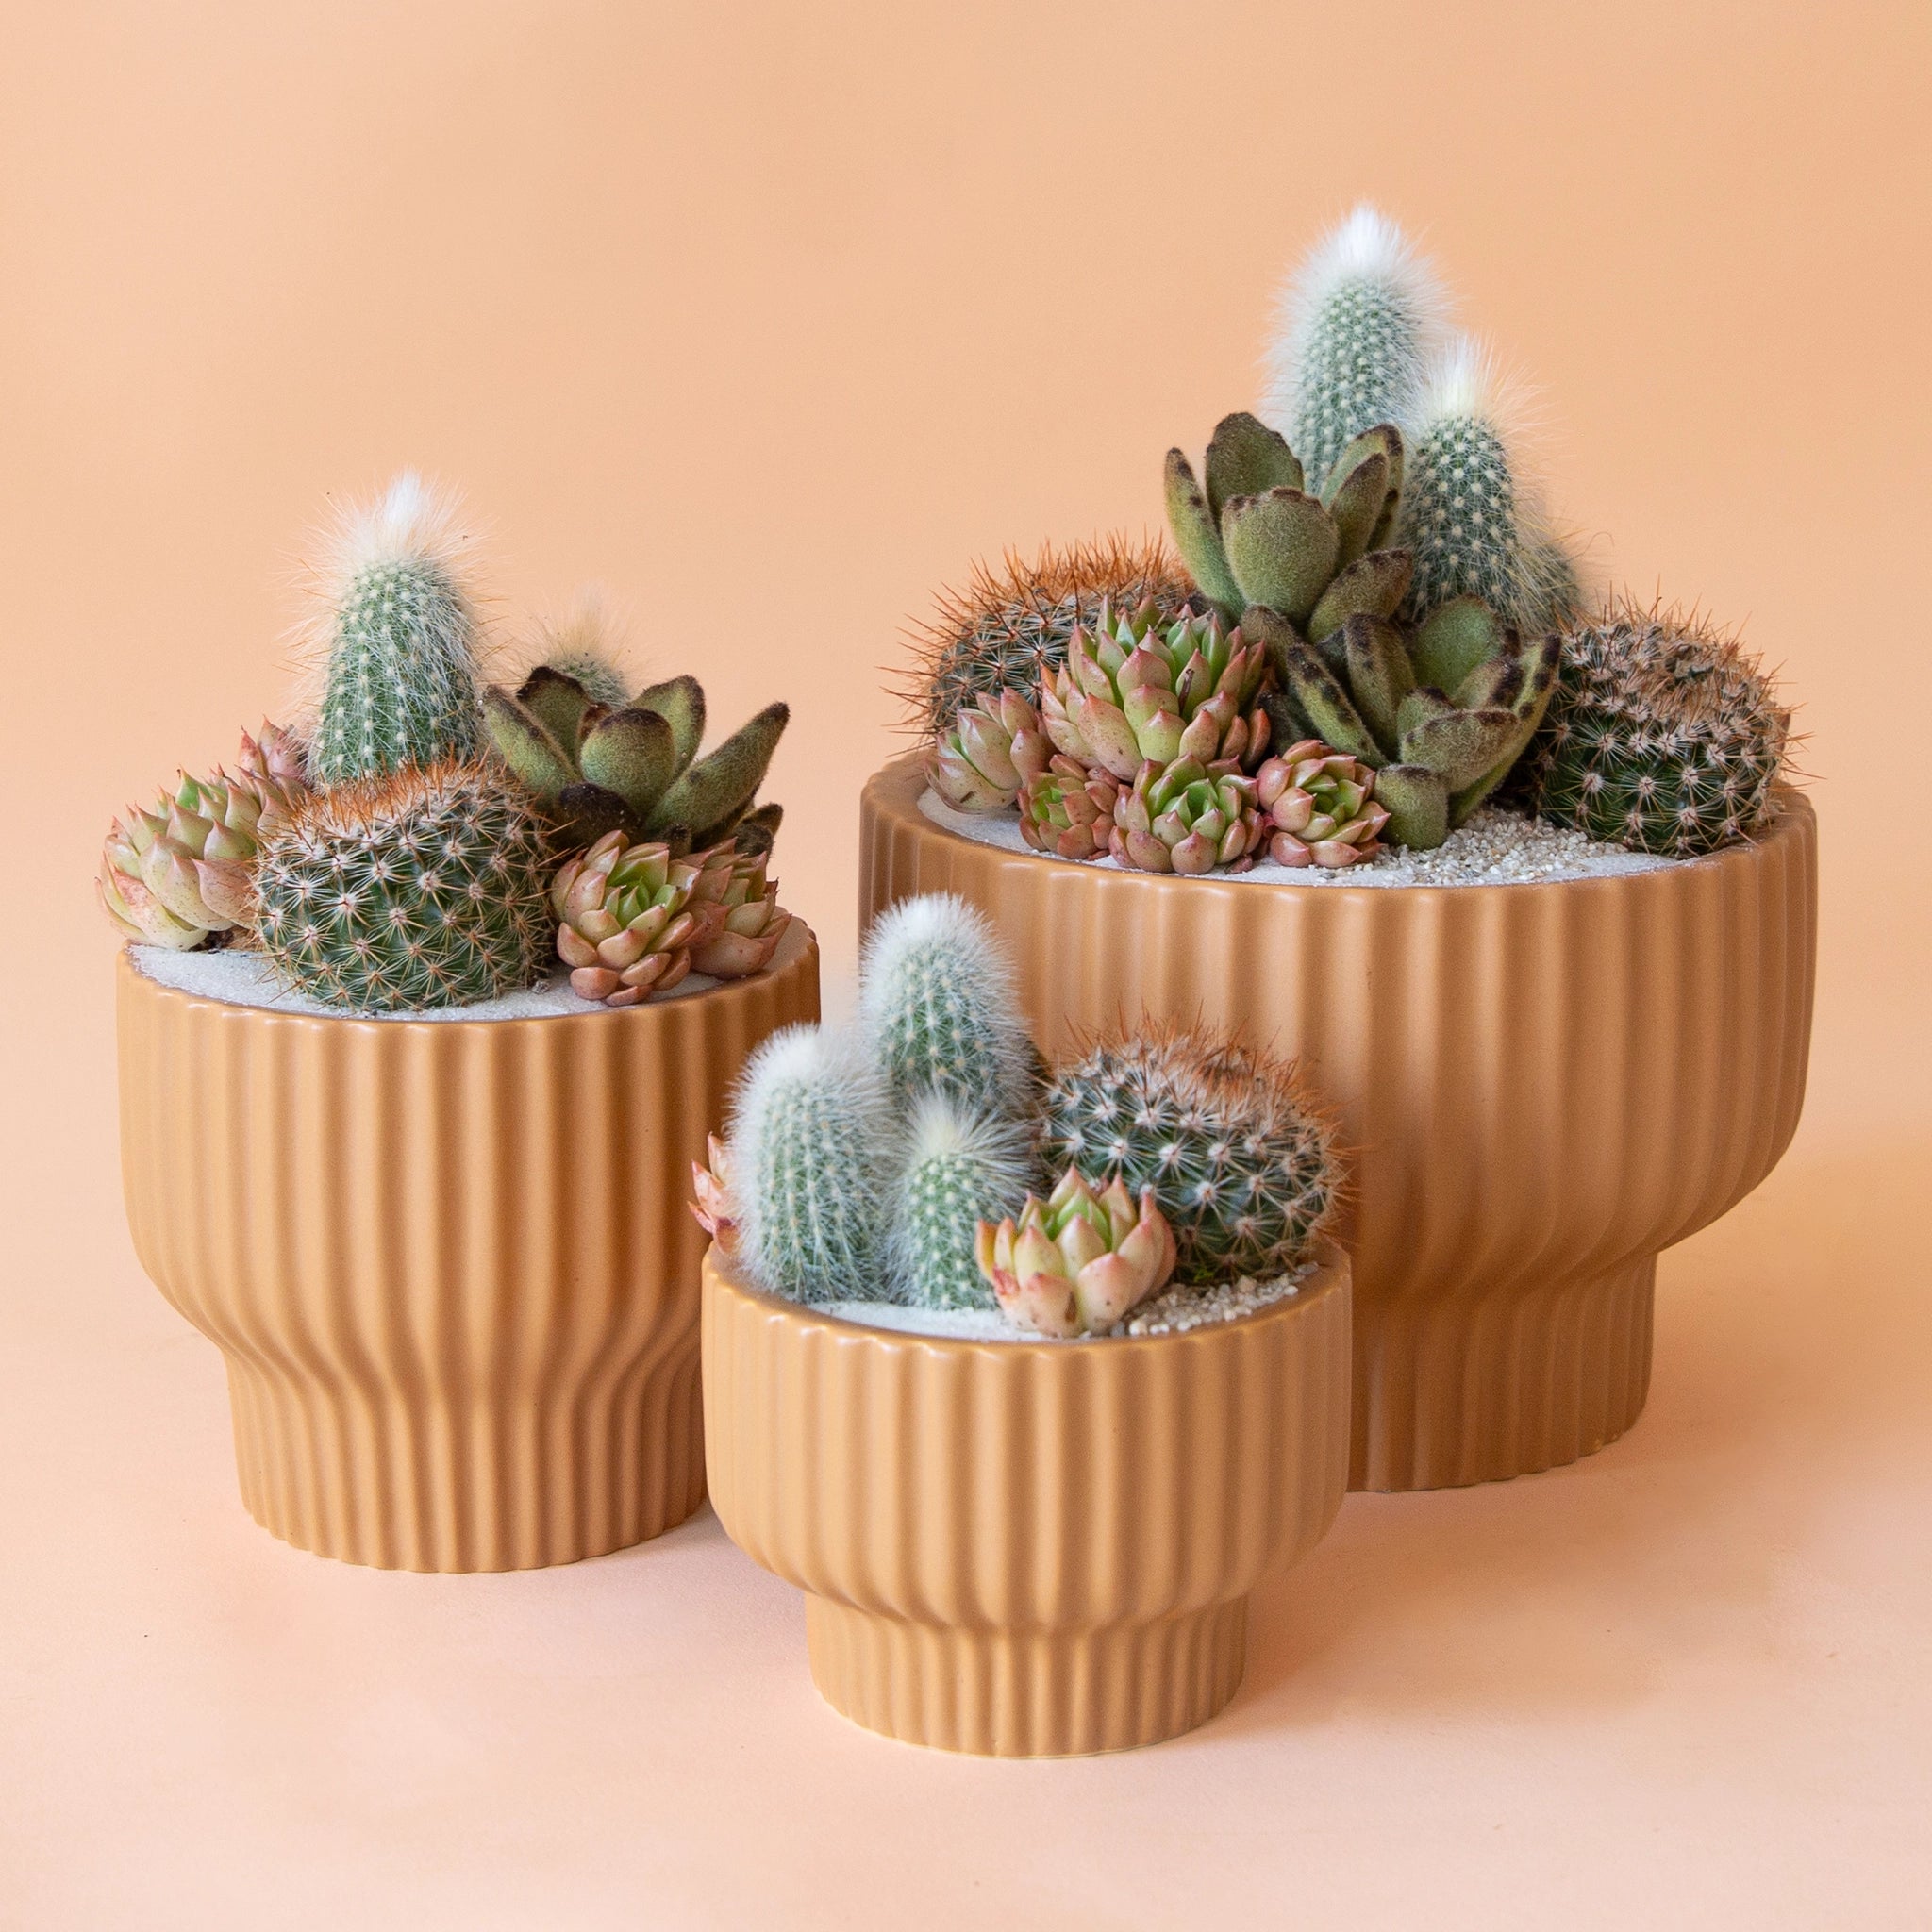 On a peachy background is a burnt orange colored ribbed pedestal planter in three different sizes filled with succulent and cacti plantings.